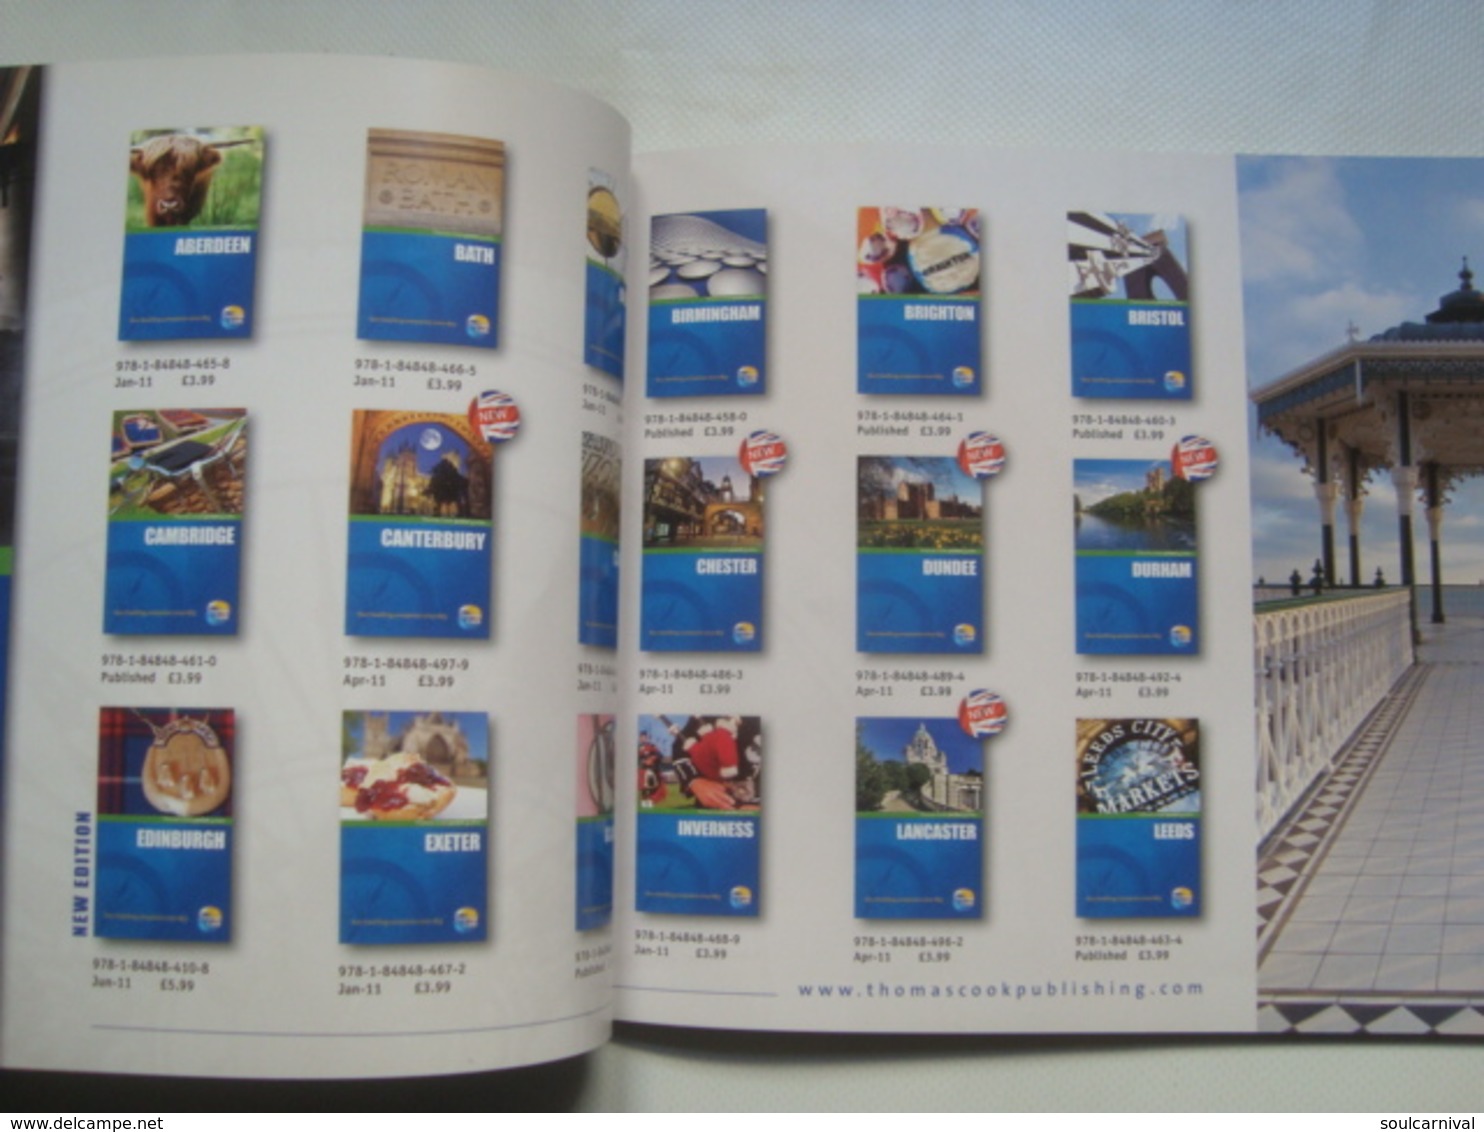 THOMAS COOK. THE GUIDE BOOK. FEATURING THE MOST COMPREHENSIVE RANGE OF UK CITY GUIDES CURRENTLY AVAILABLE - UK,  2010 - Otros & Sin Clasificación